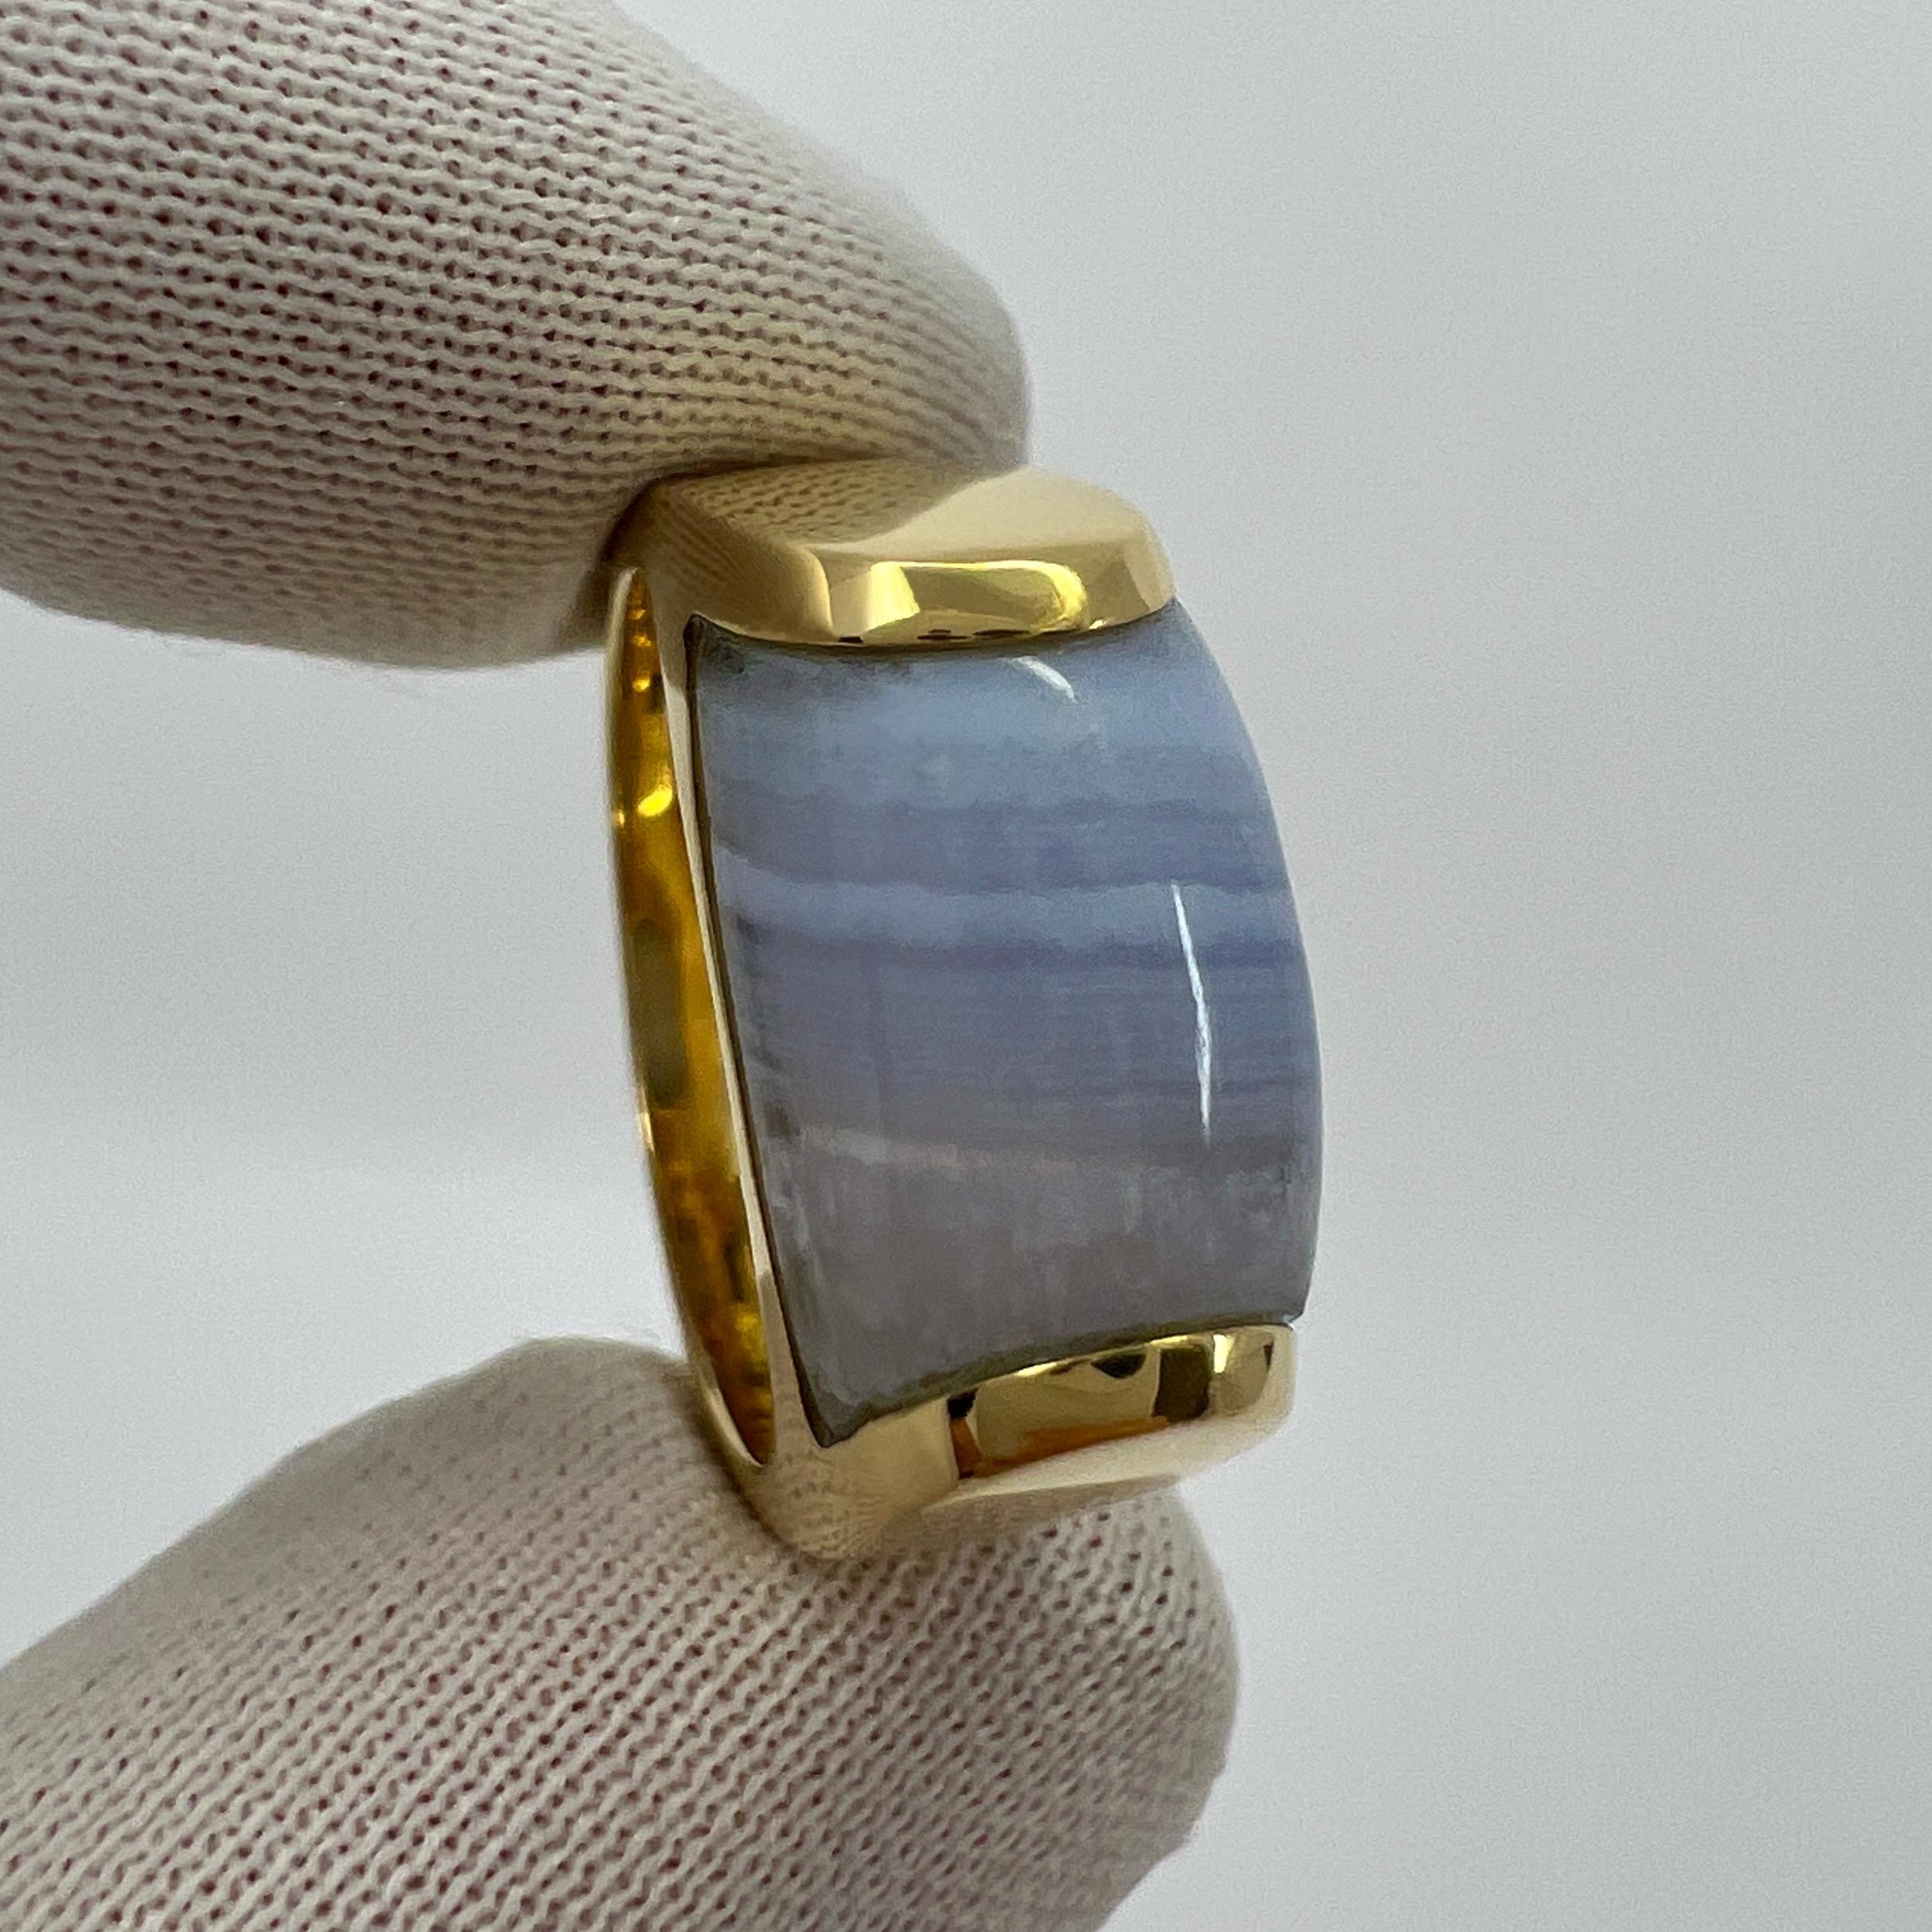 Rare Bvlgari Blue Purple Banded Agate Tronchetto 18k Yellow Gold Ring.

Beautiful domed blue purple banded agate - chalcedony set in a fine 18k yellow gold tension set ring.

In excellent condition, has been professionally polished and